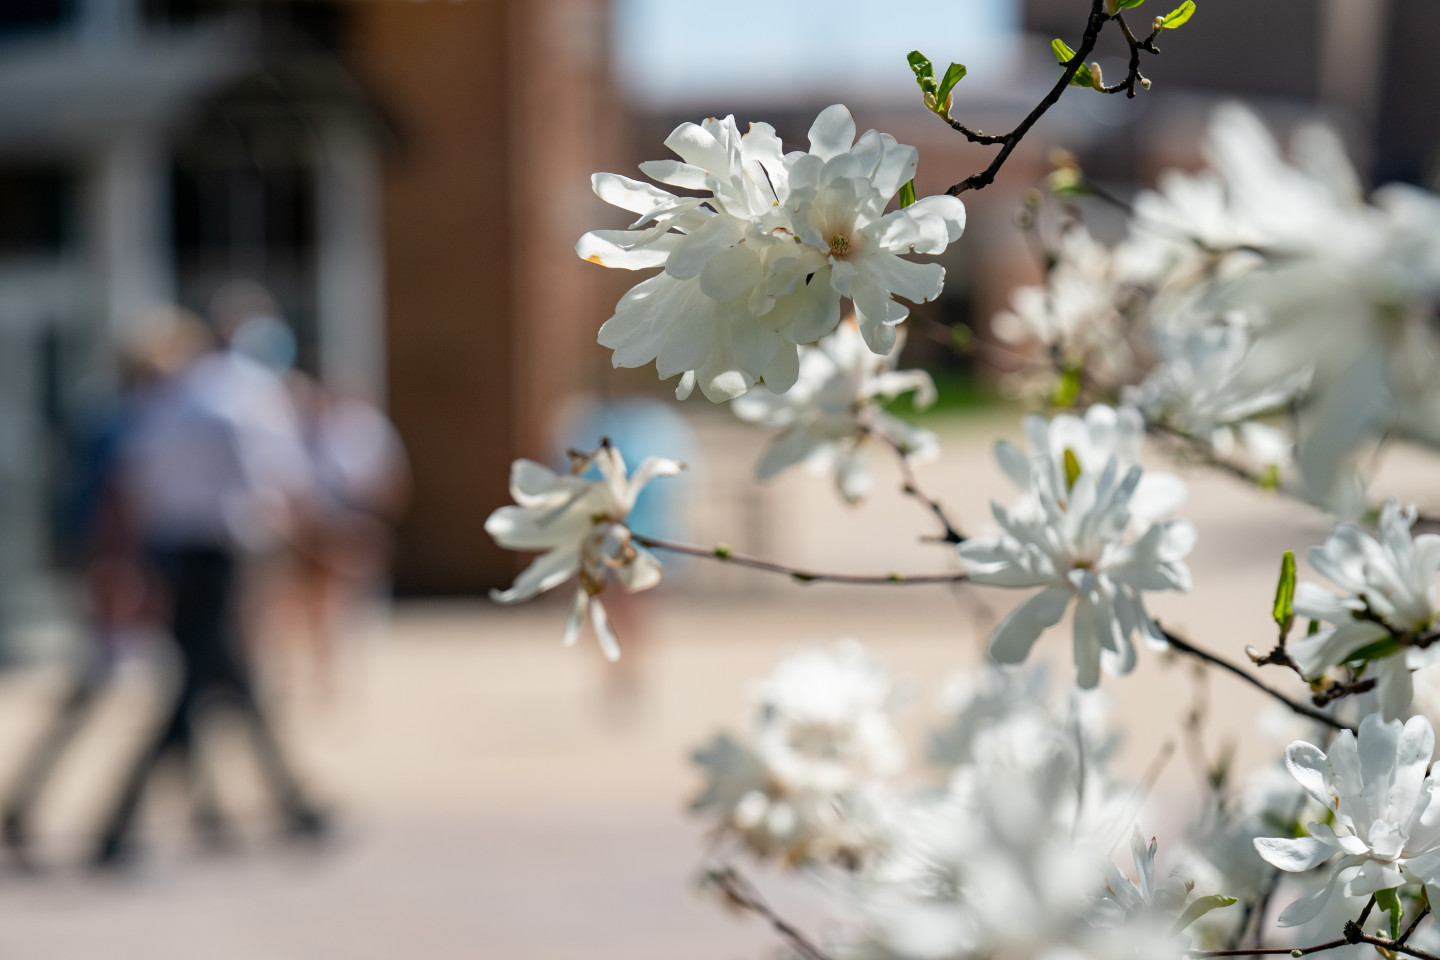 White flowers with students walking on campus in the background